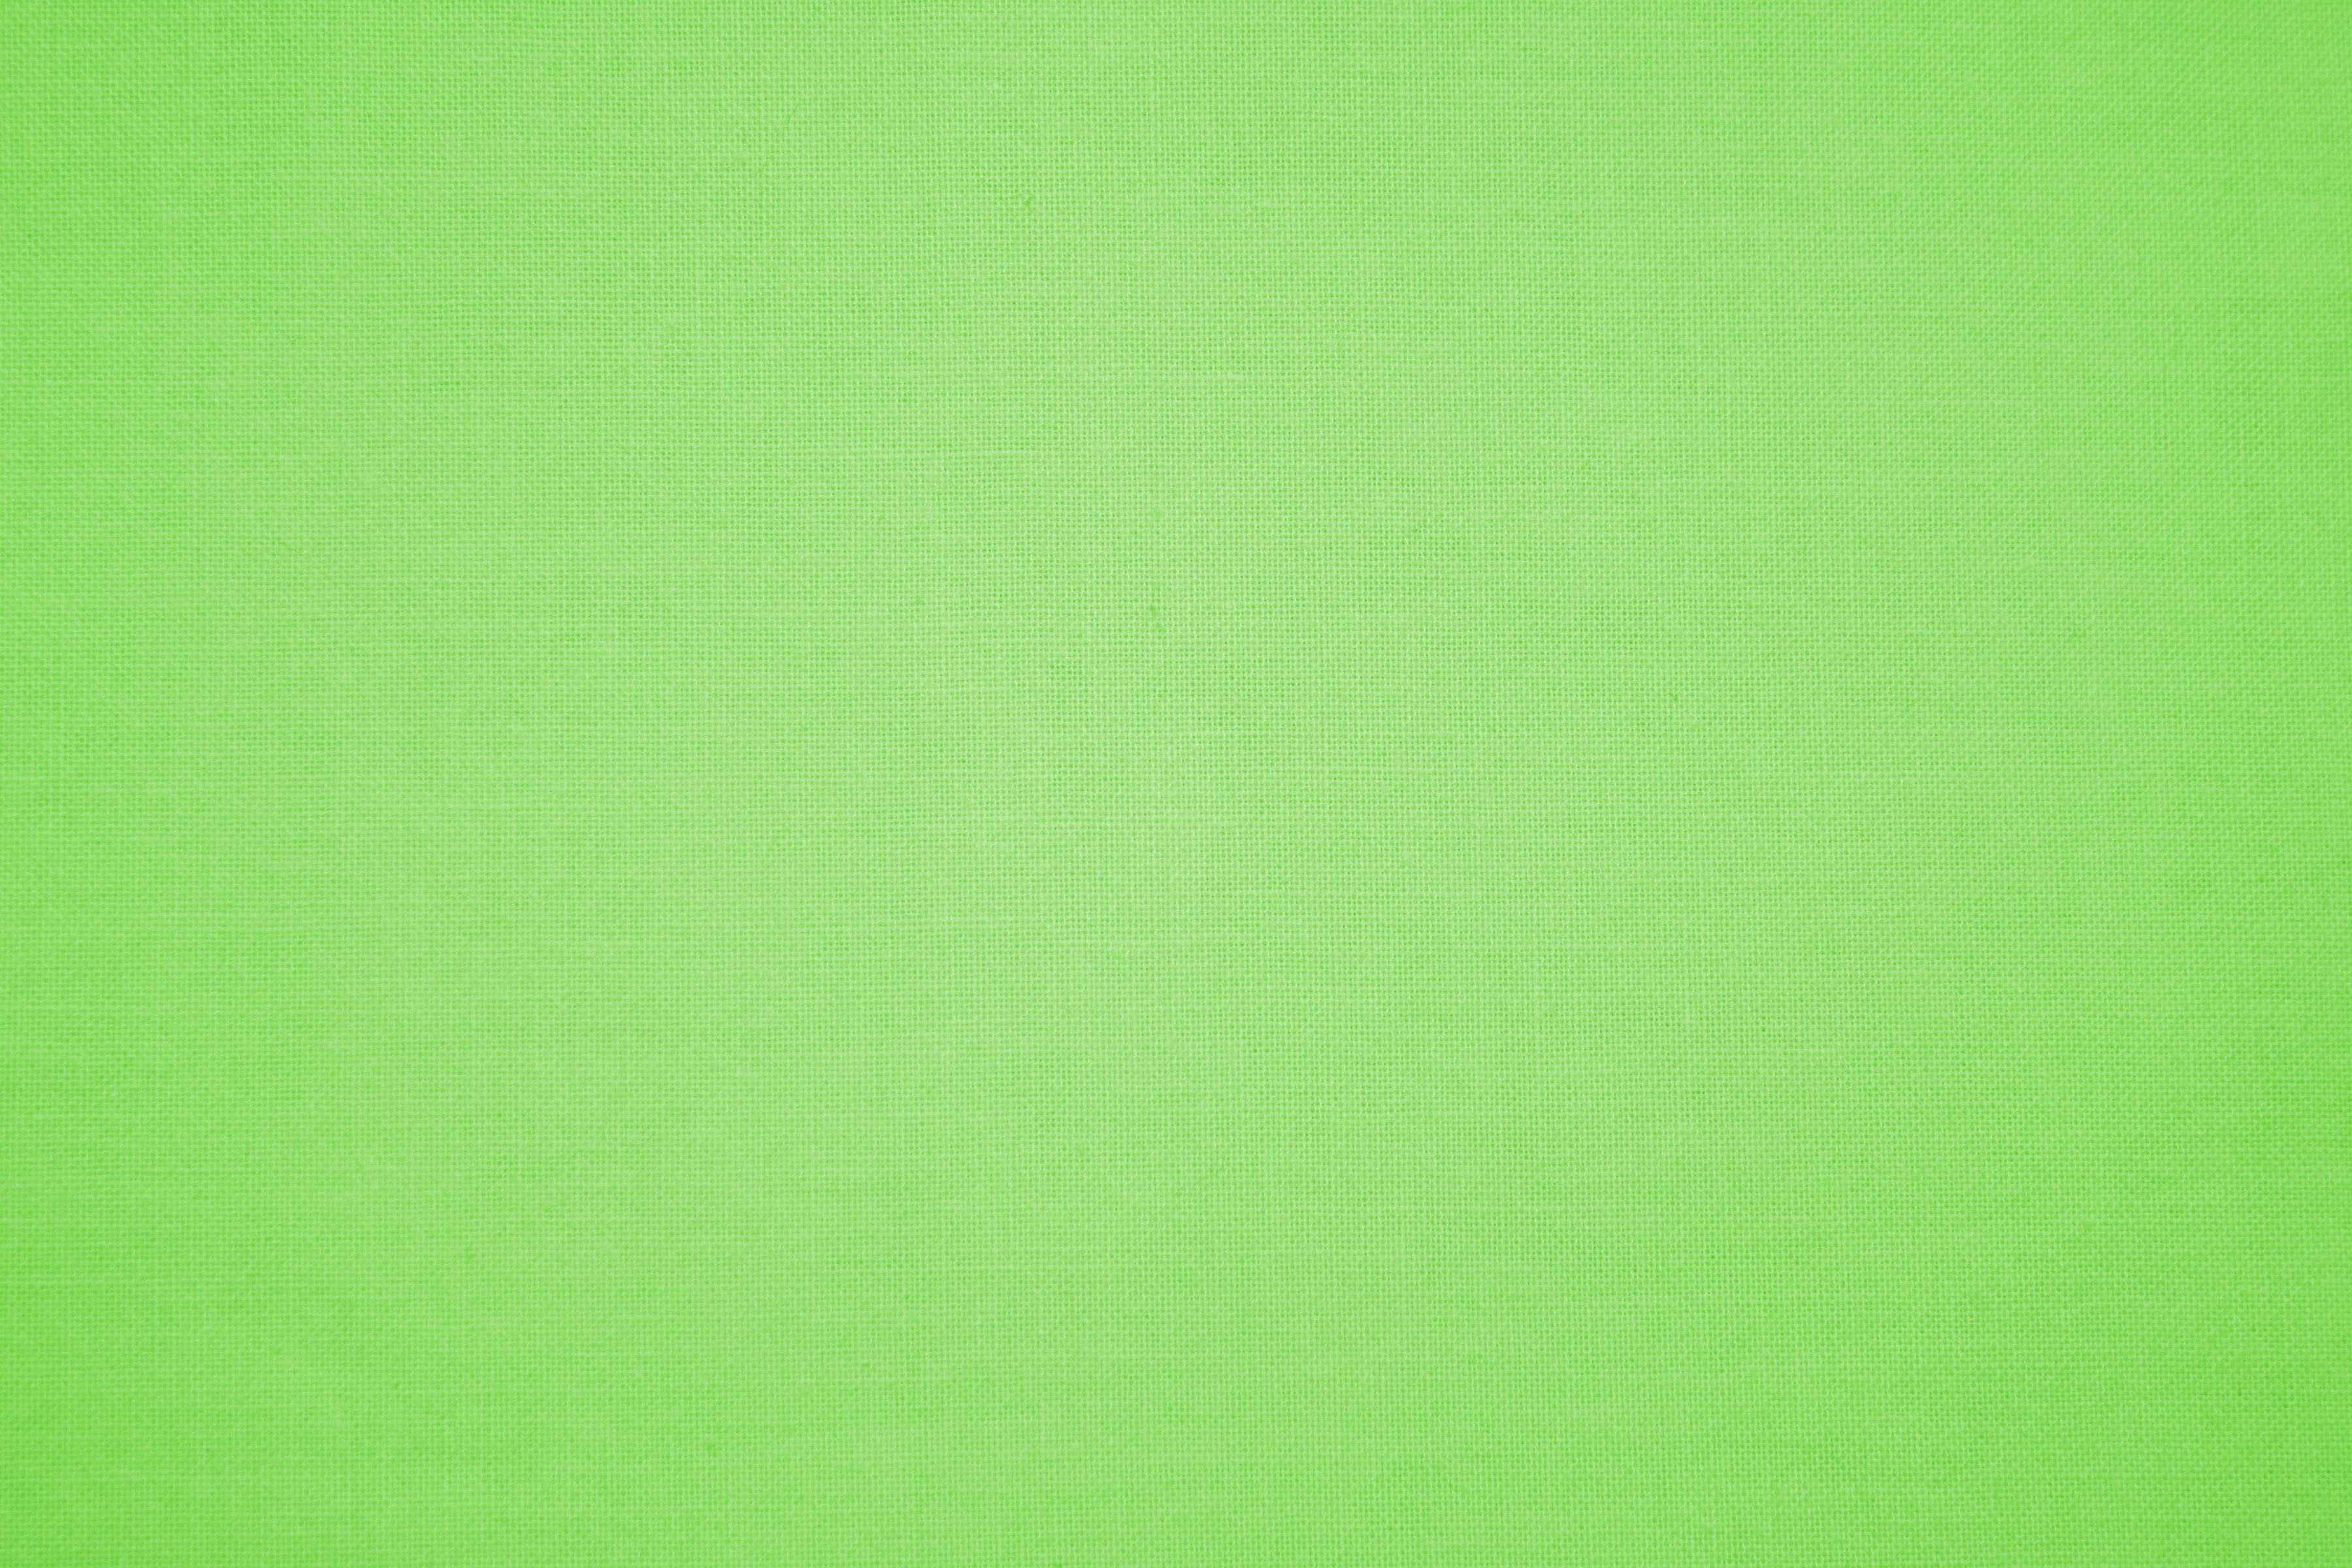 Lime Green Canvas Fabric Texture Picture. Free Photograph